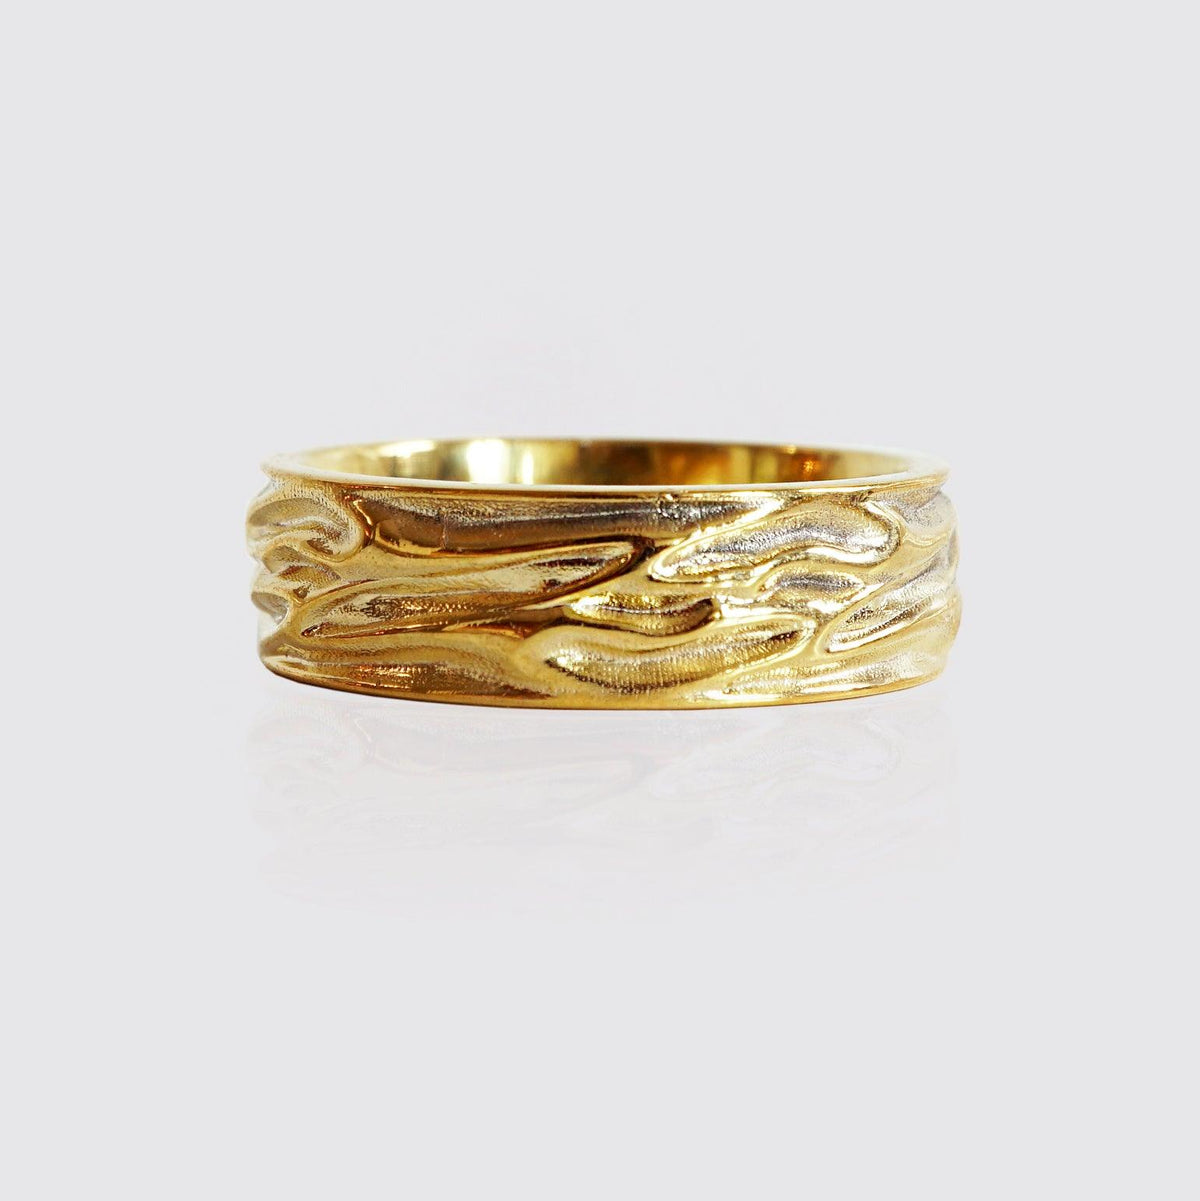 Liquid Ring Band in Sterling Silver and 14K Gold, 7mm - Tippy Taste Jewelry